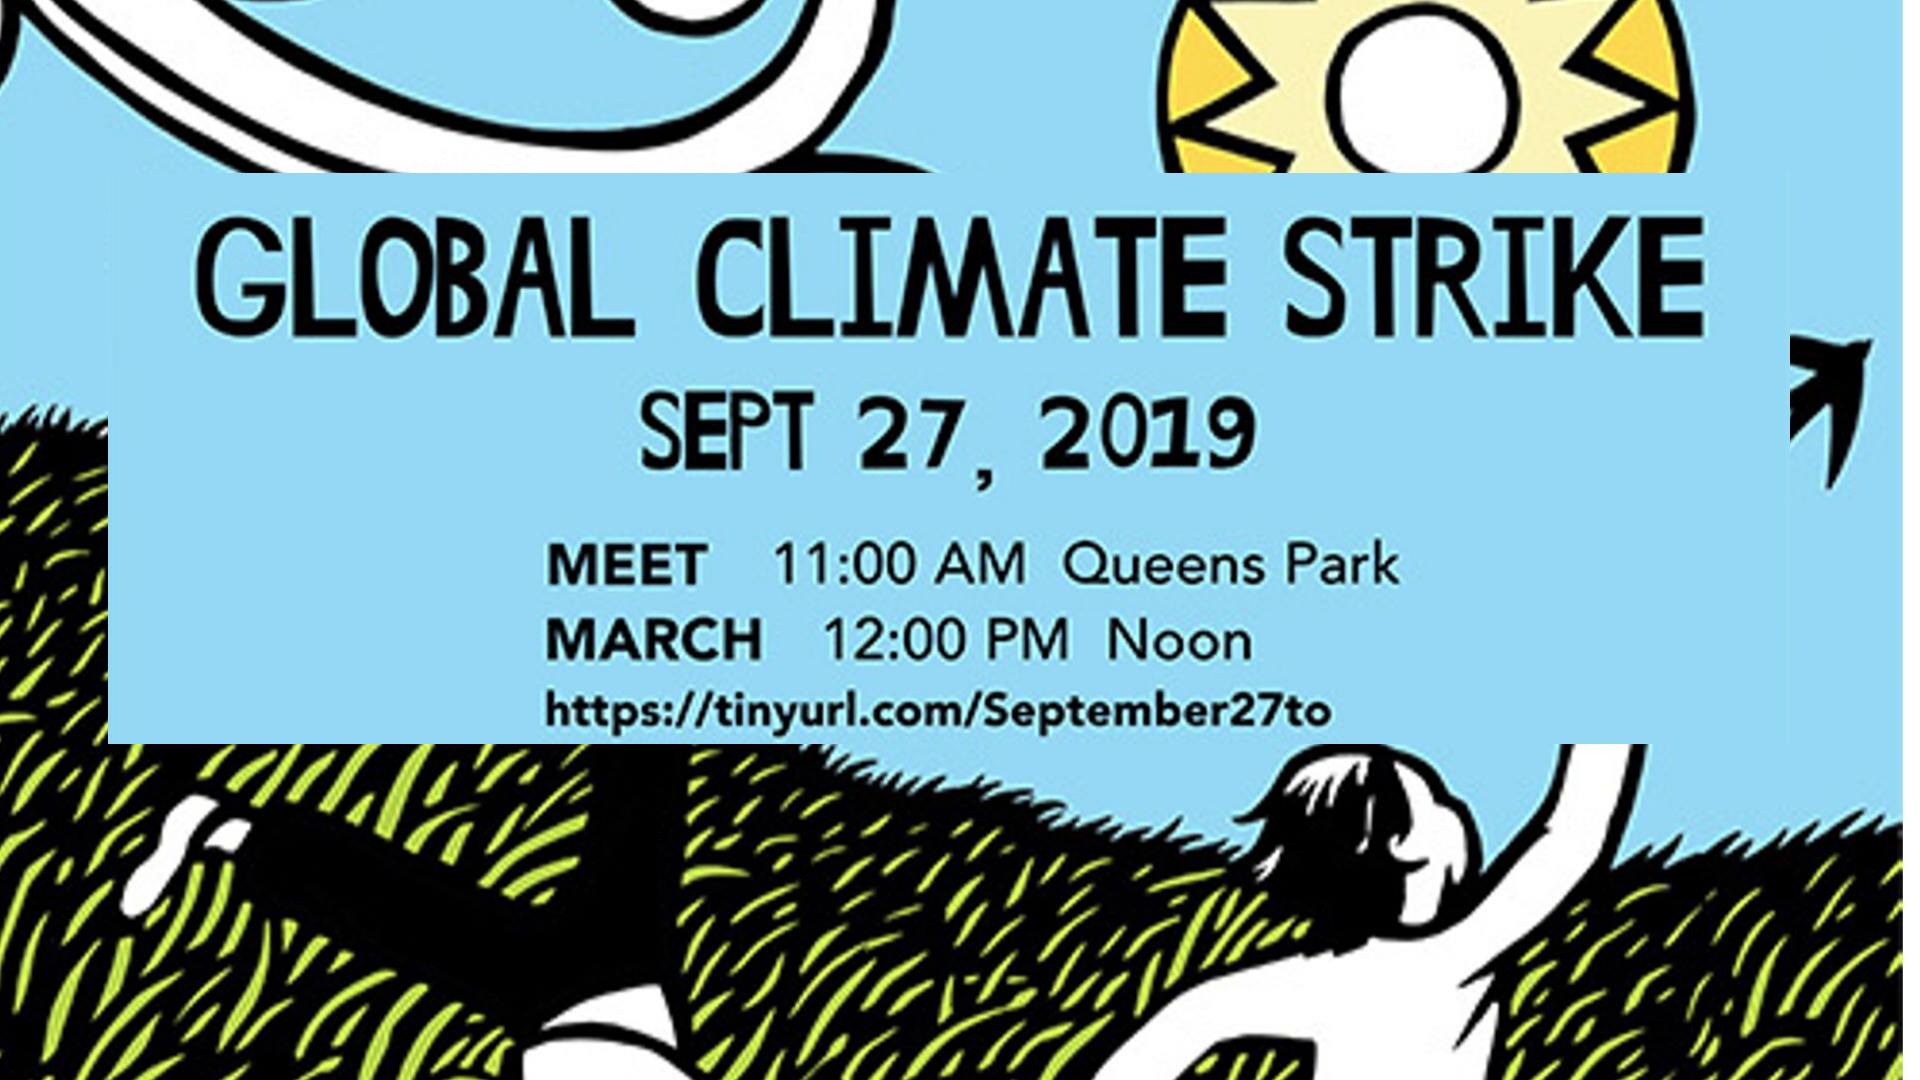 Global Climate Strike 2019 Poster